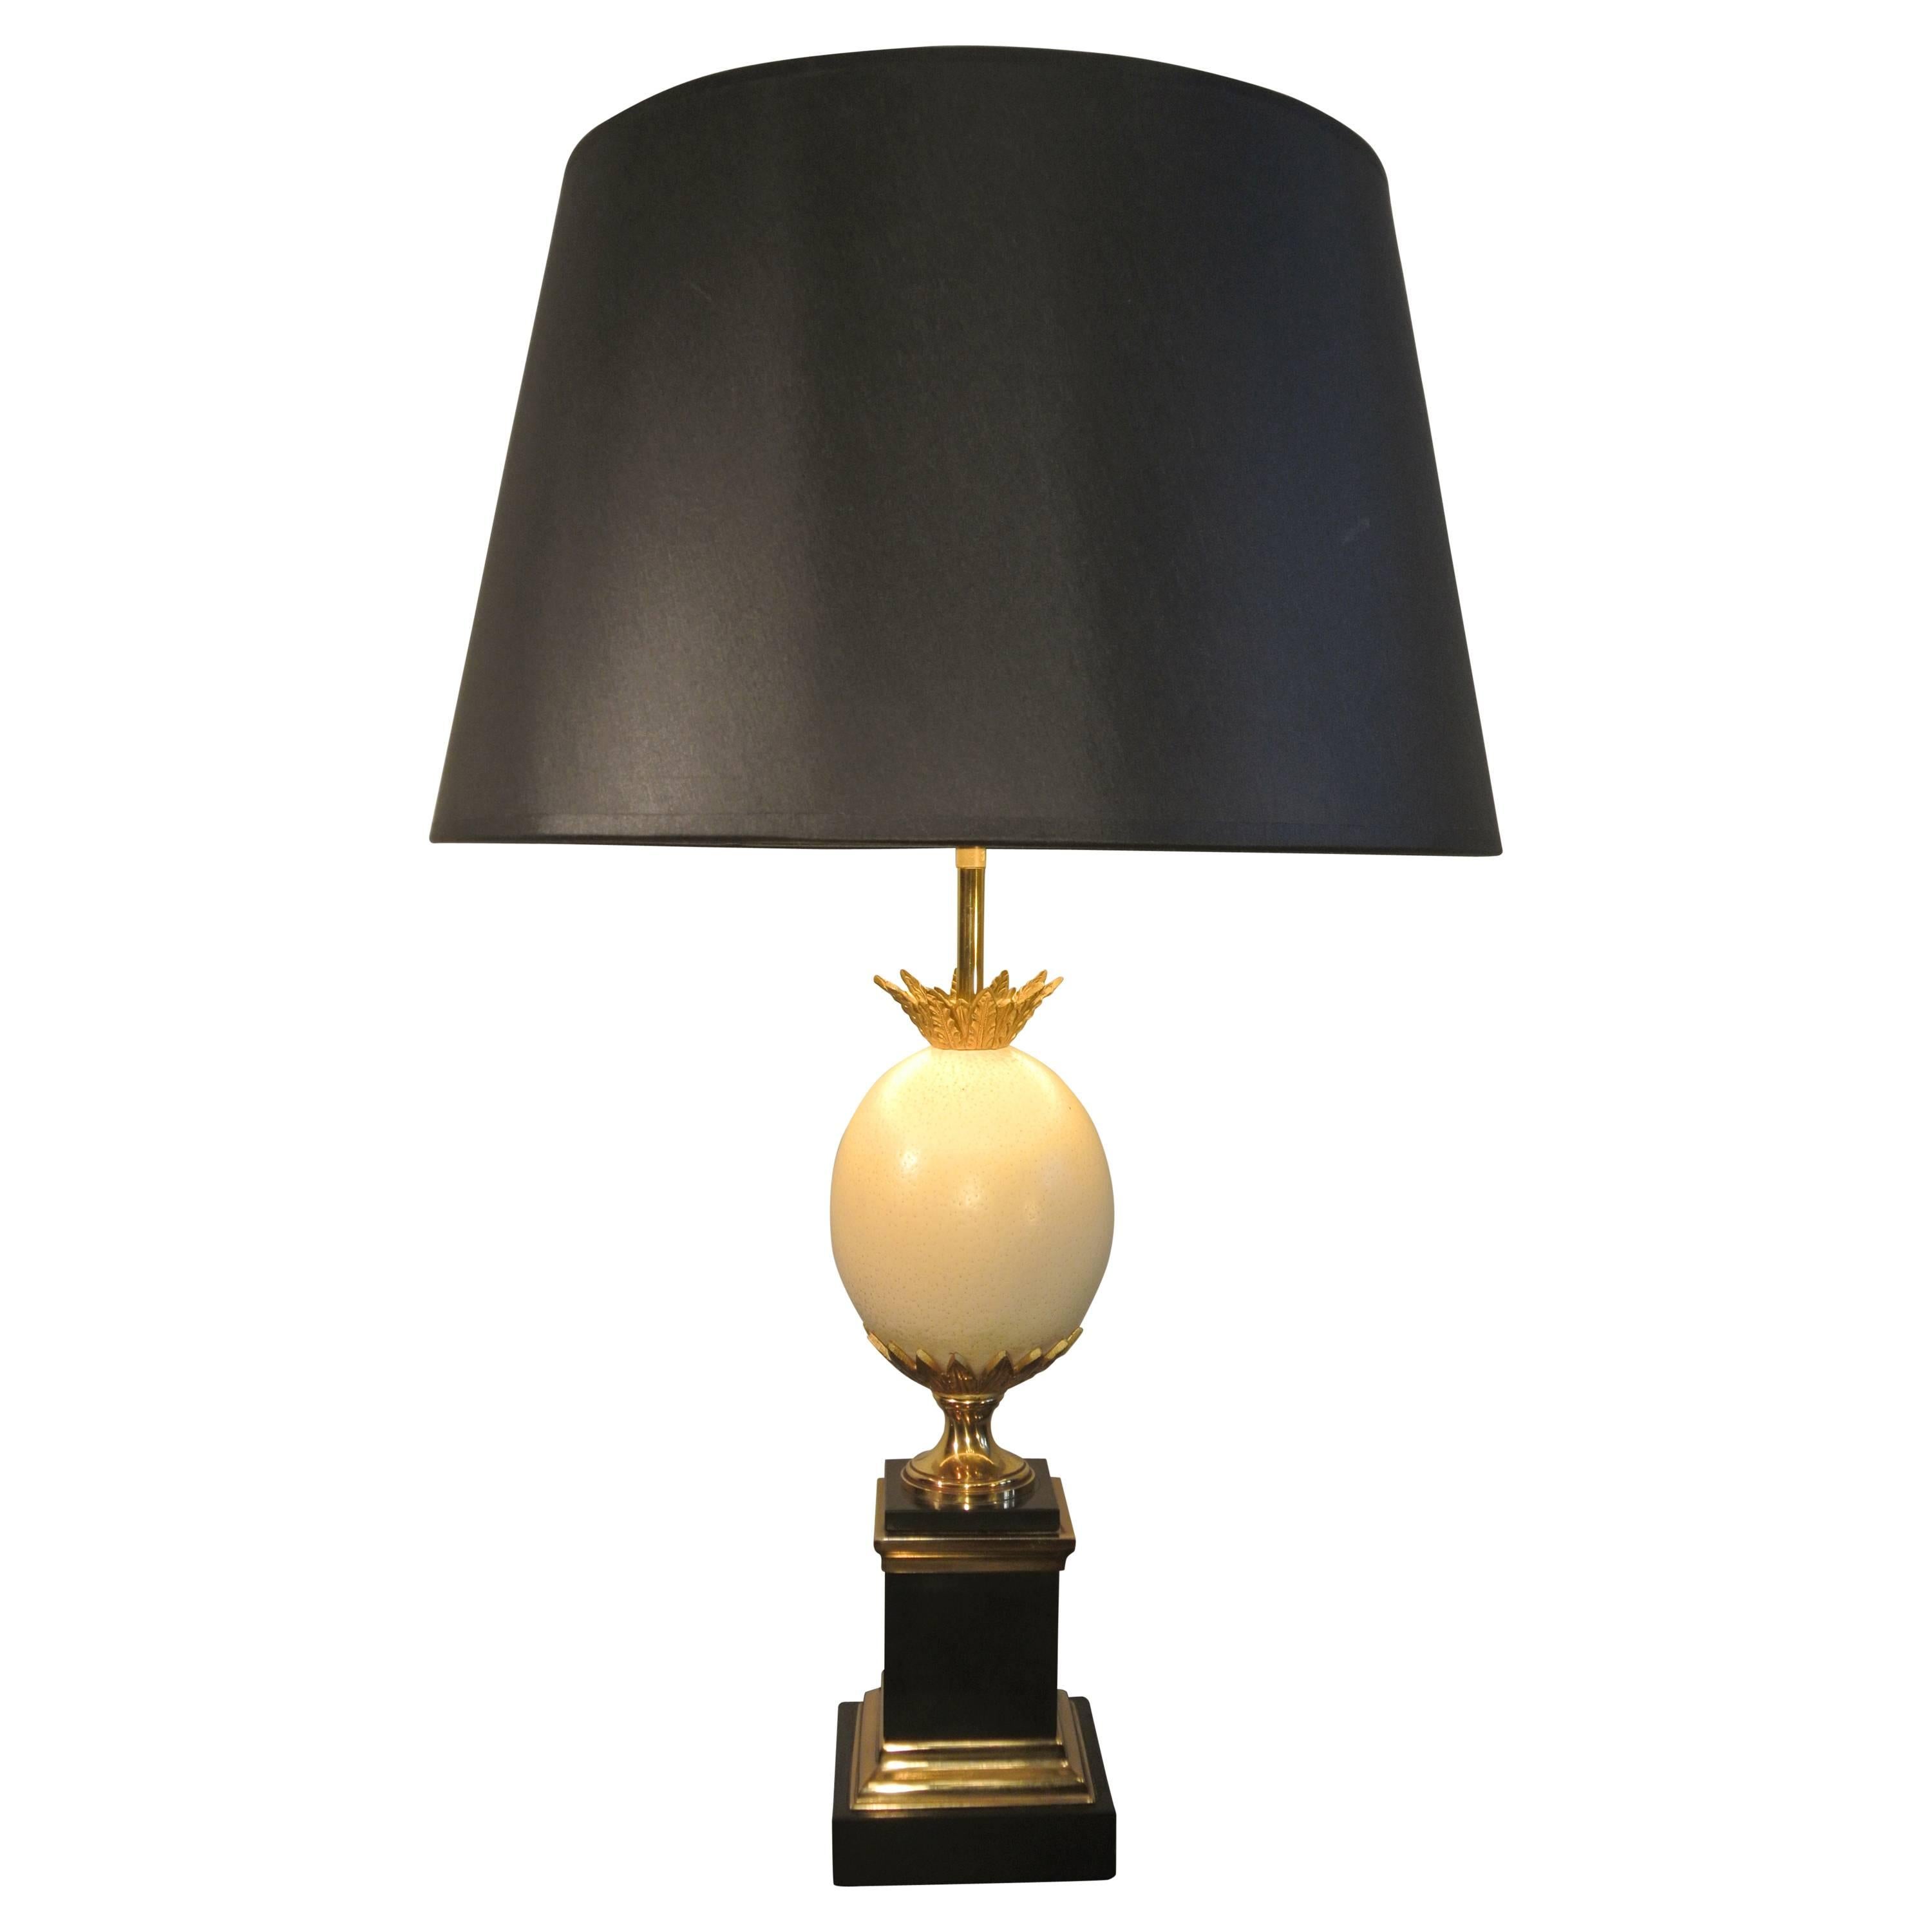 Beautiful 'Austrian Egg' Lamp from Maison Charles